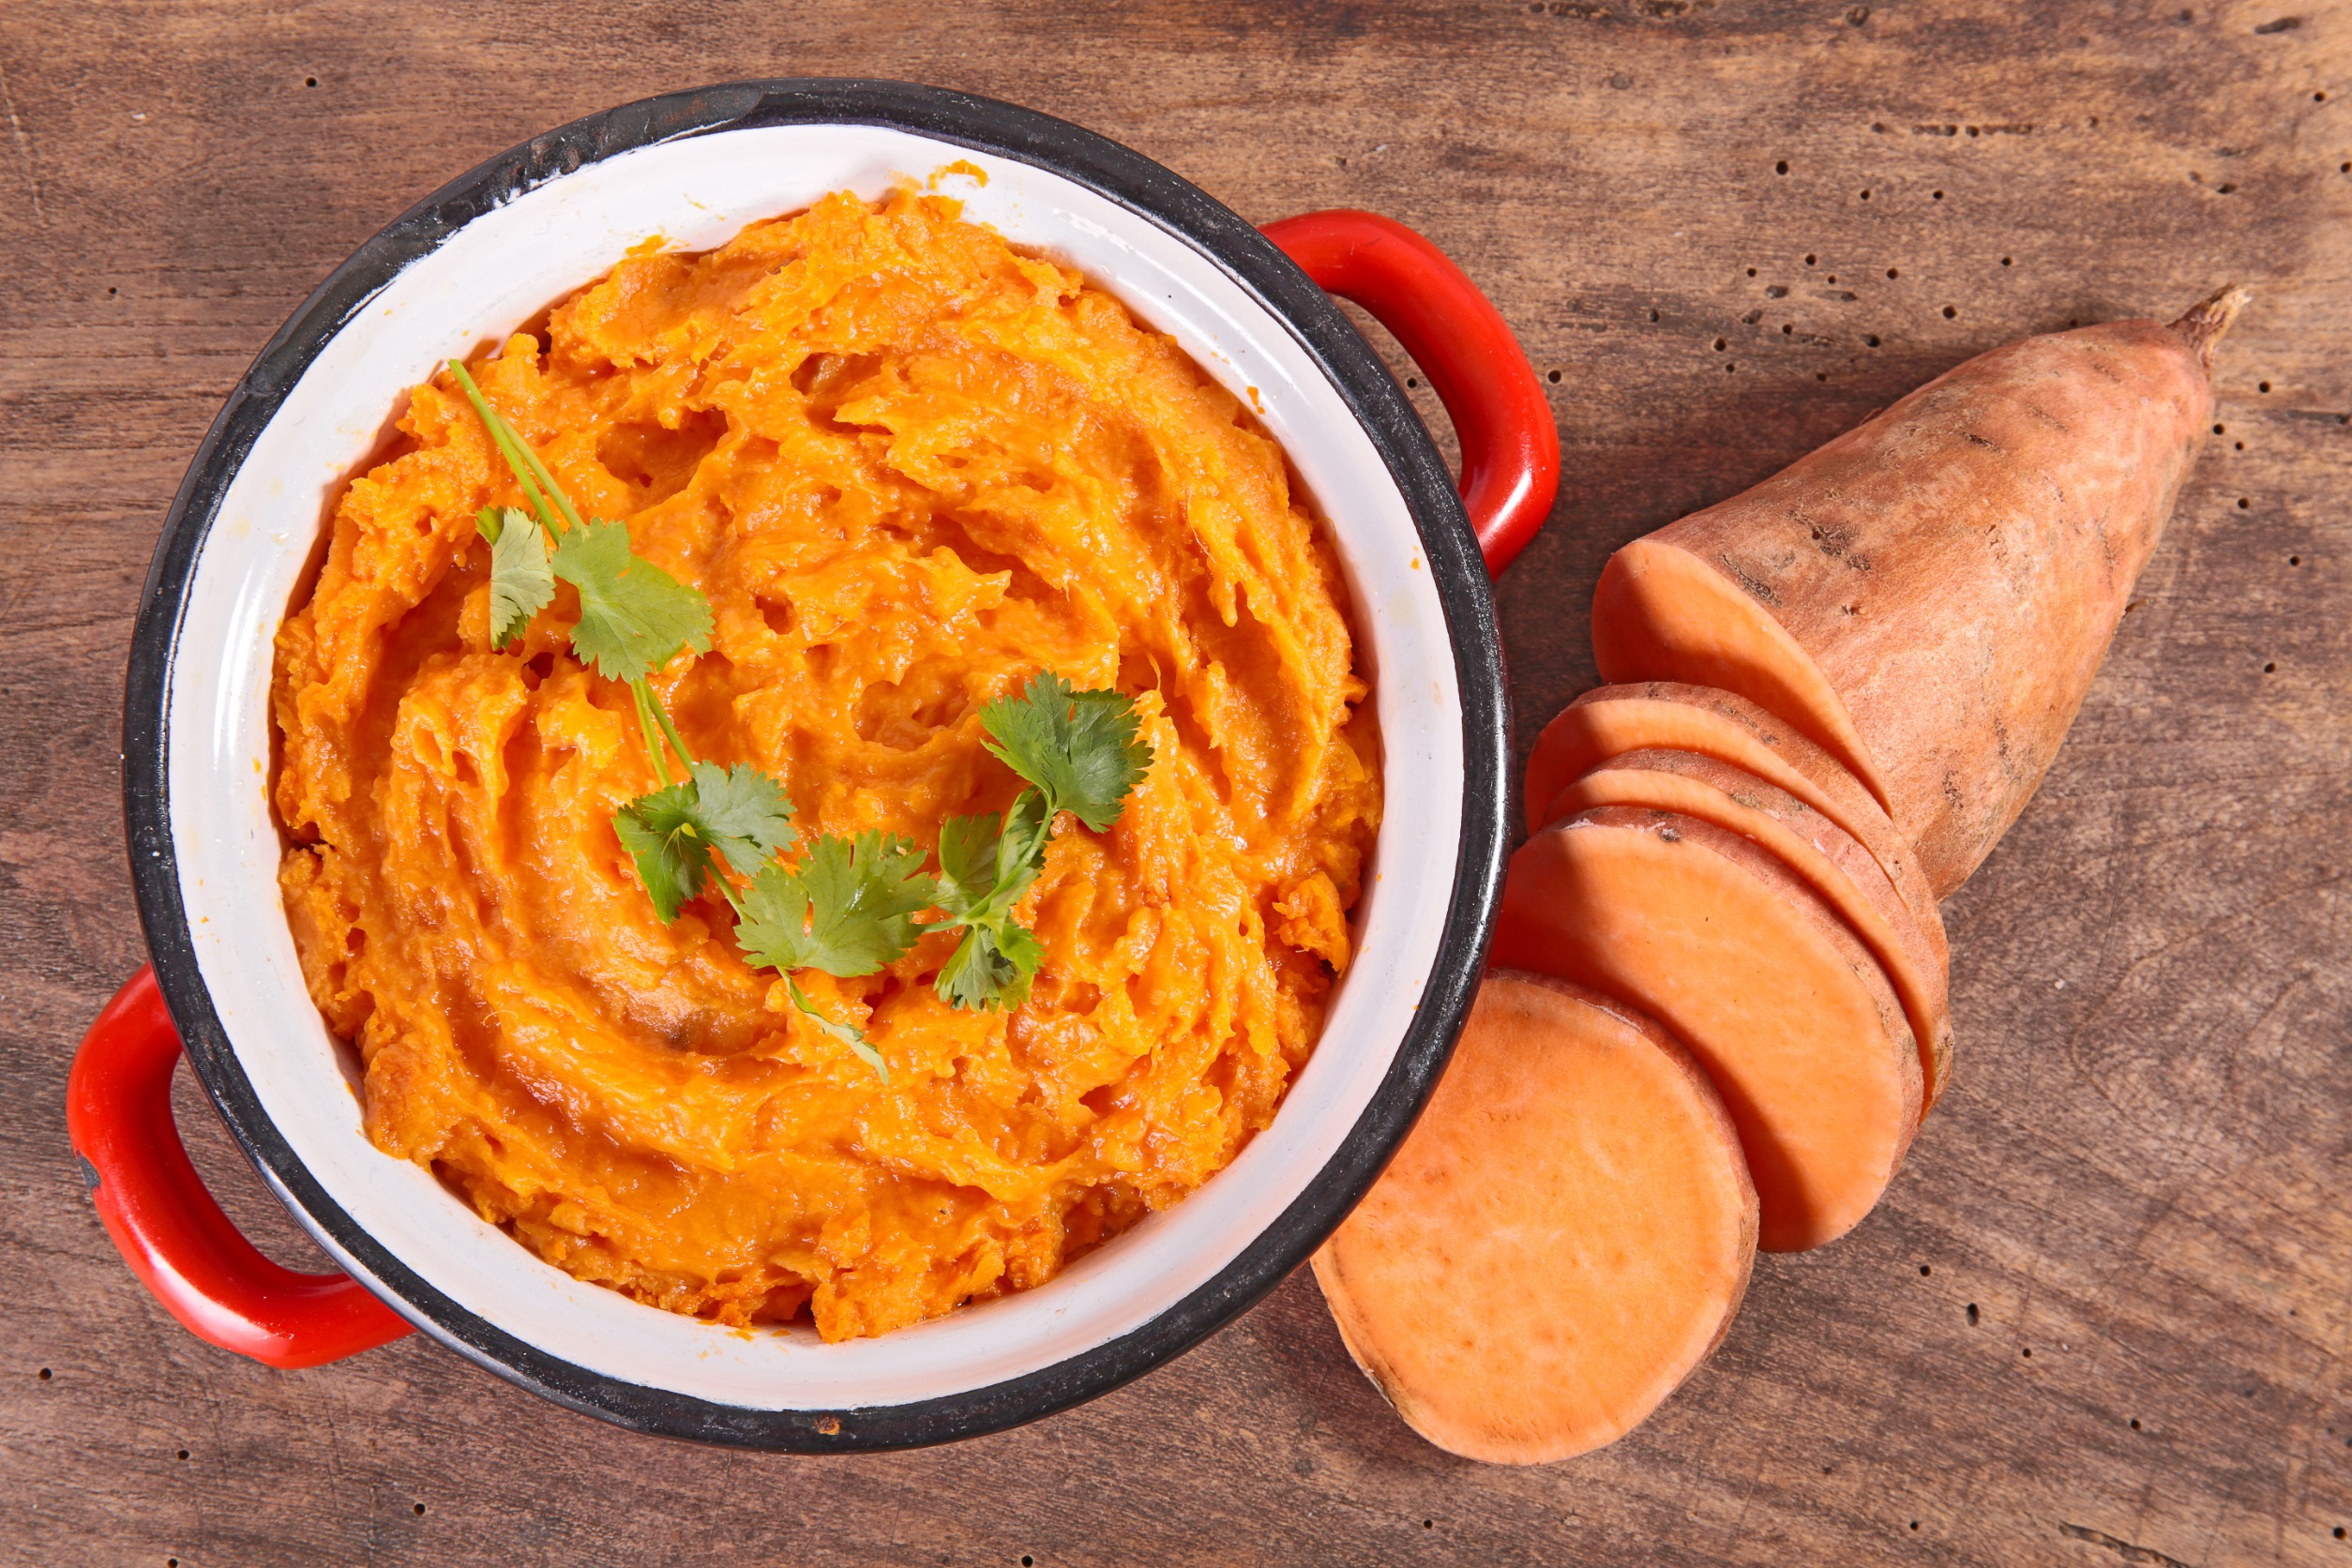 Mashed sweet potatoes in a bowl with a sweet potato on the side.